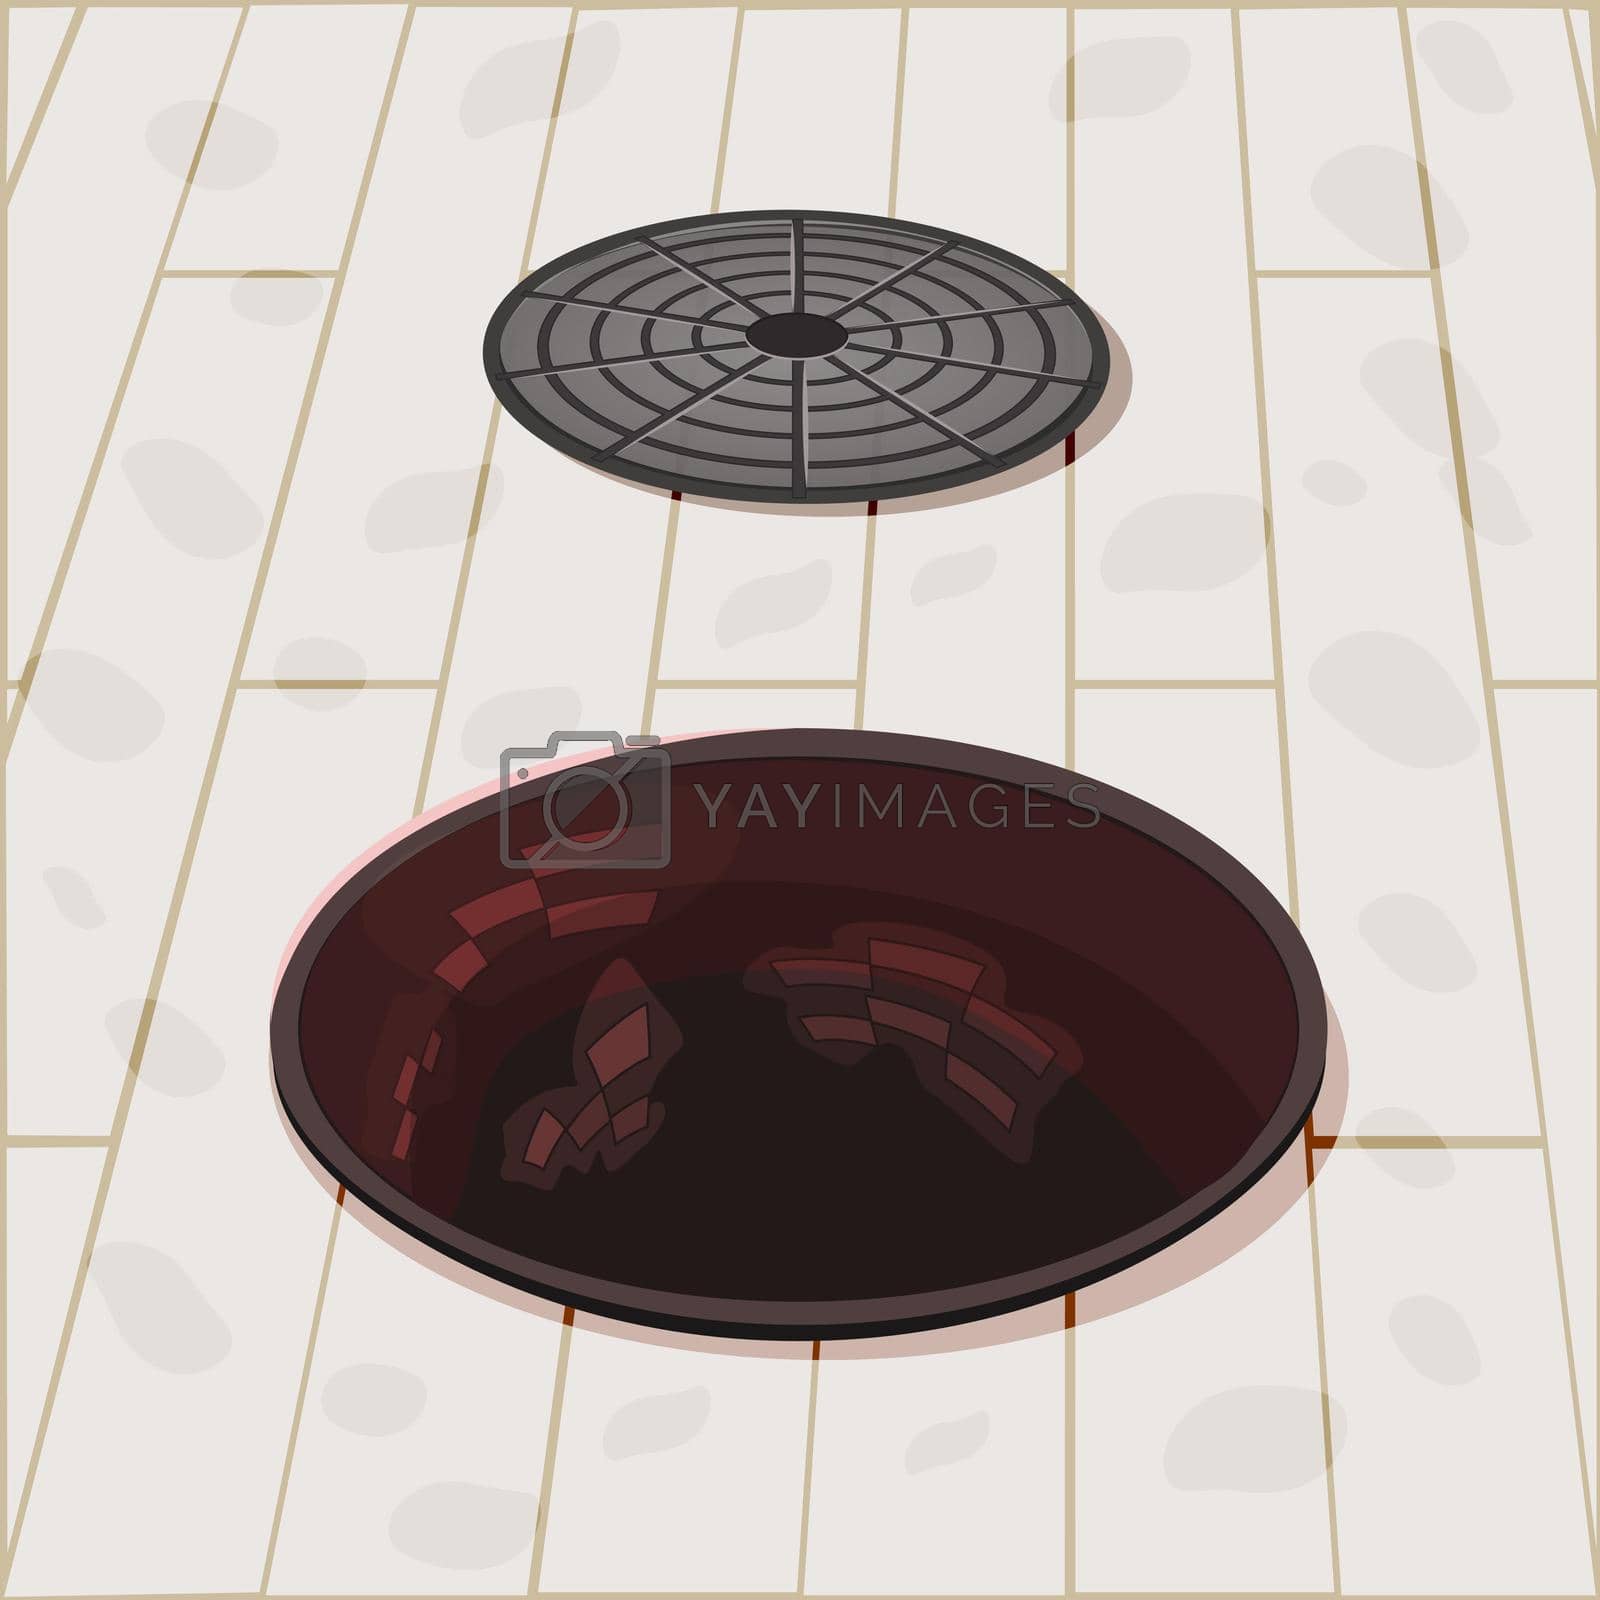 Royalty free image of Open manhole on sidewalk. Opened sewer well cover on street. by KajaNi